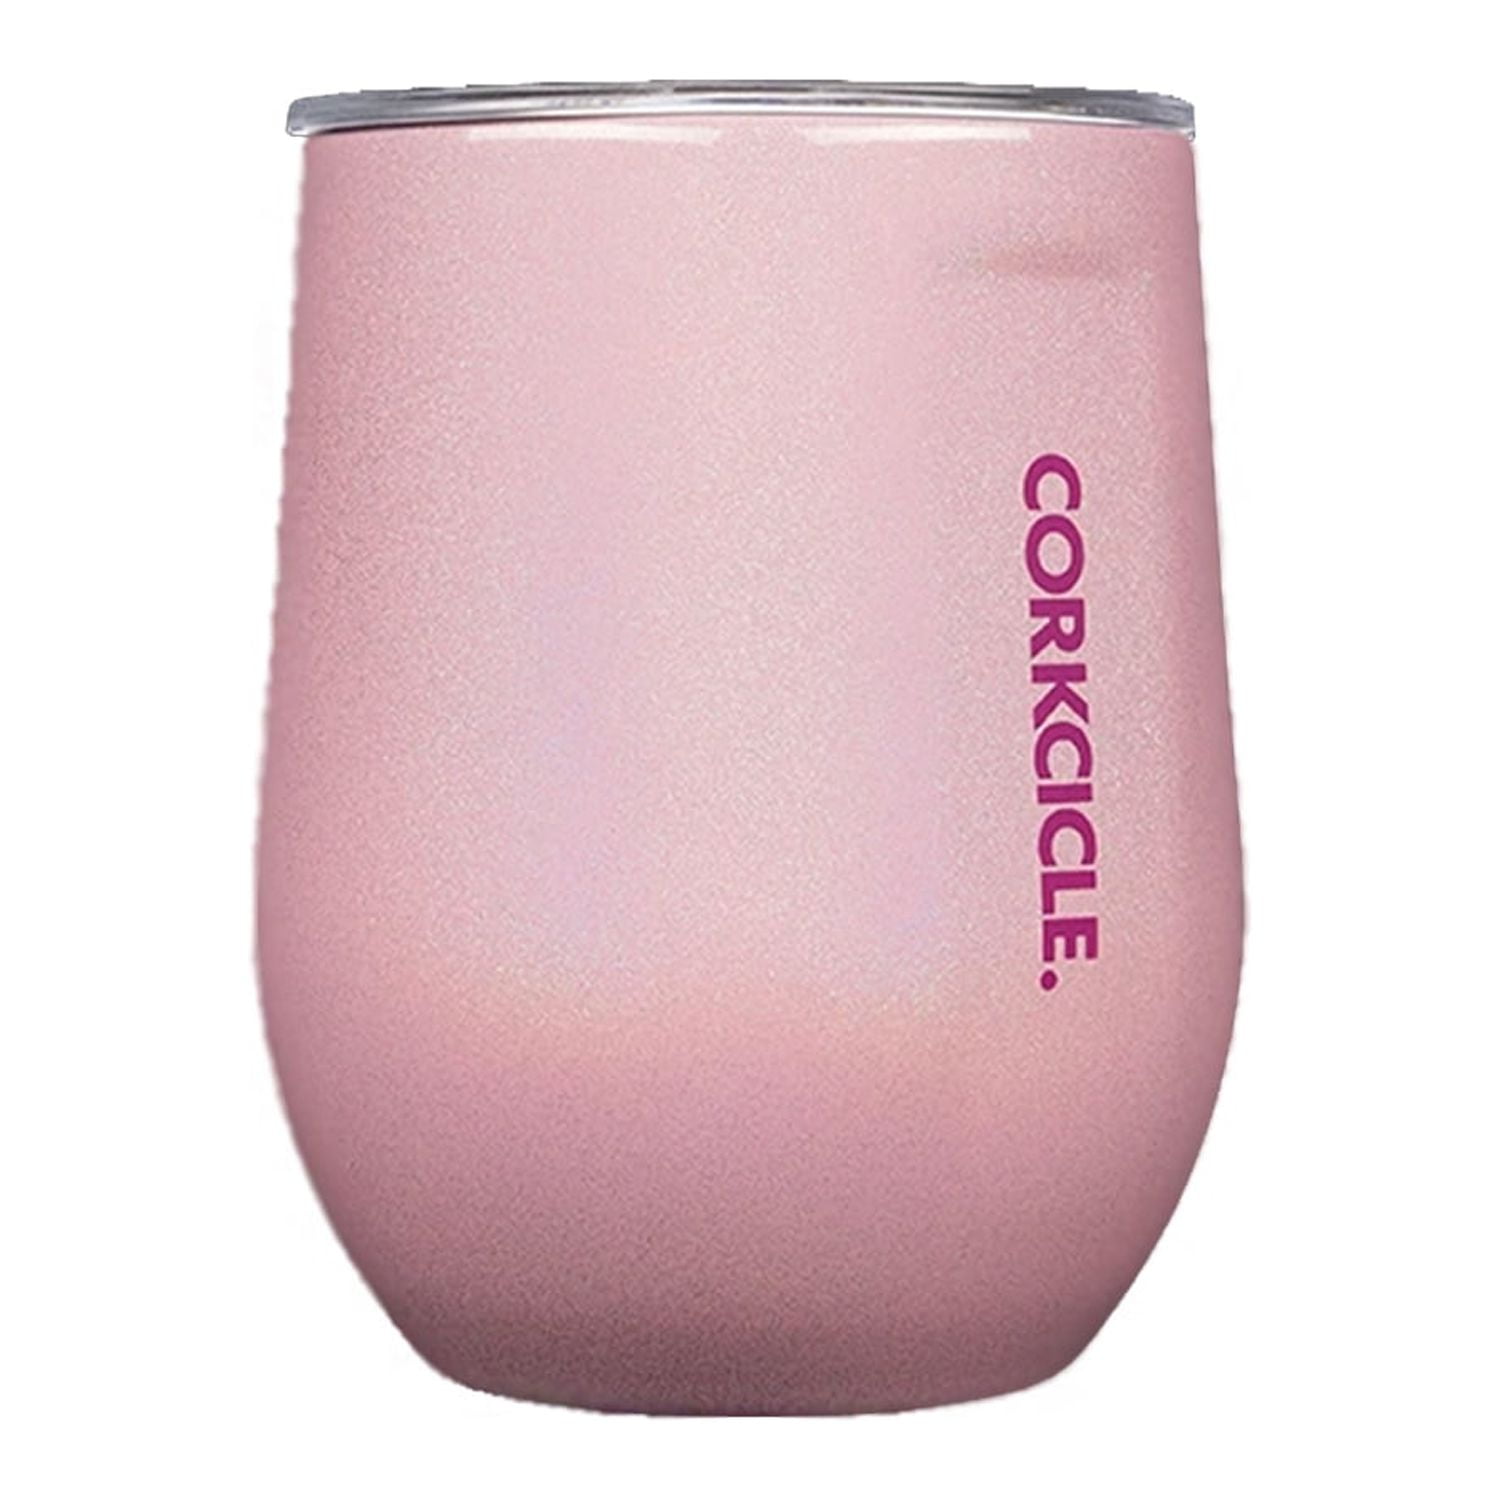 Corkcicle Insulated Stemless Wine Glass, Set of 2 – To The Nines